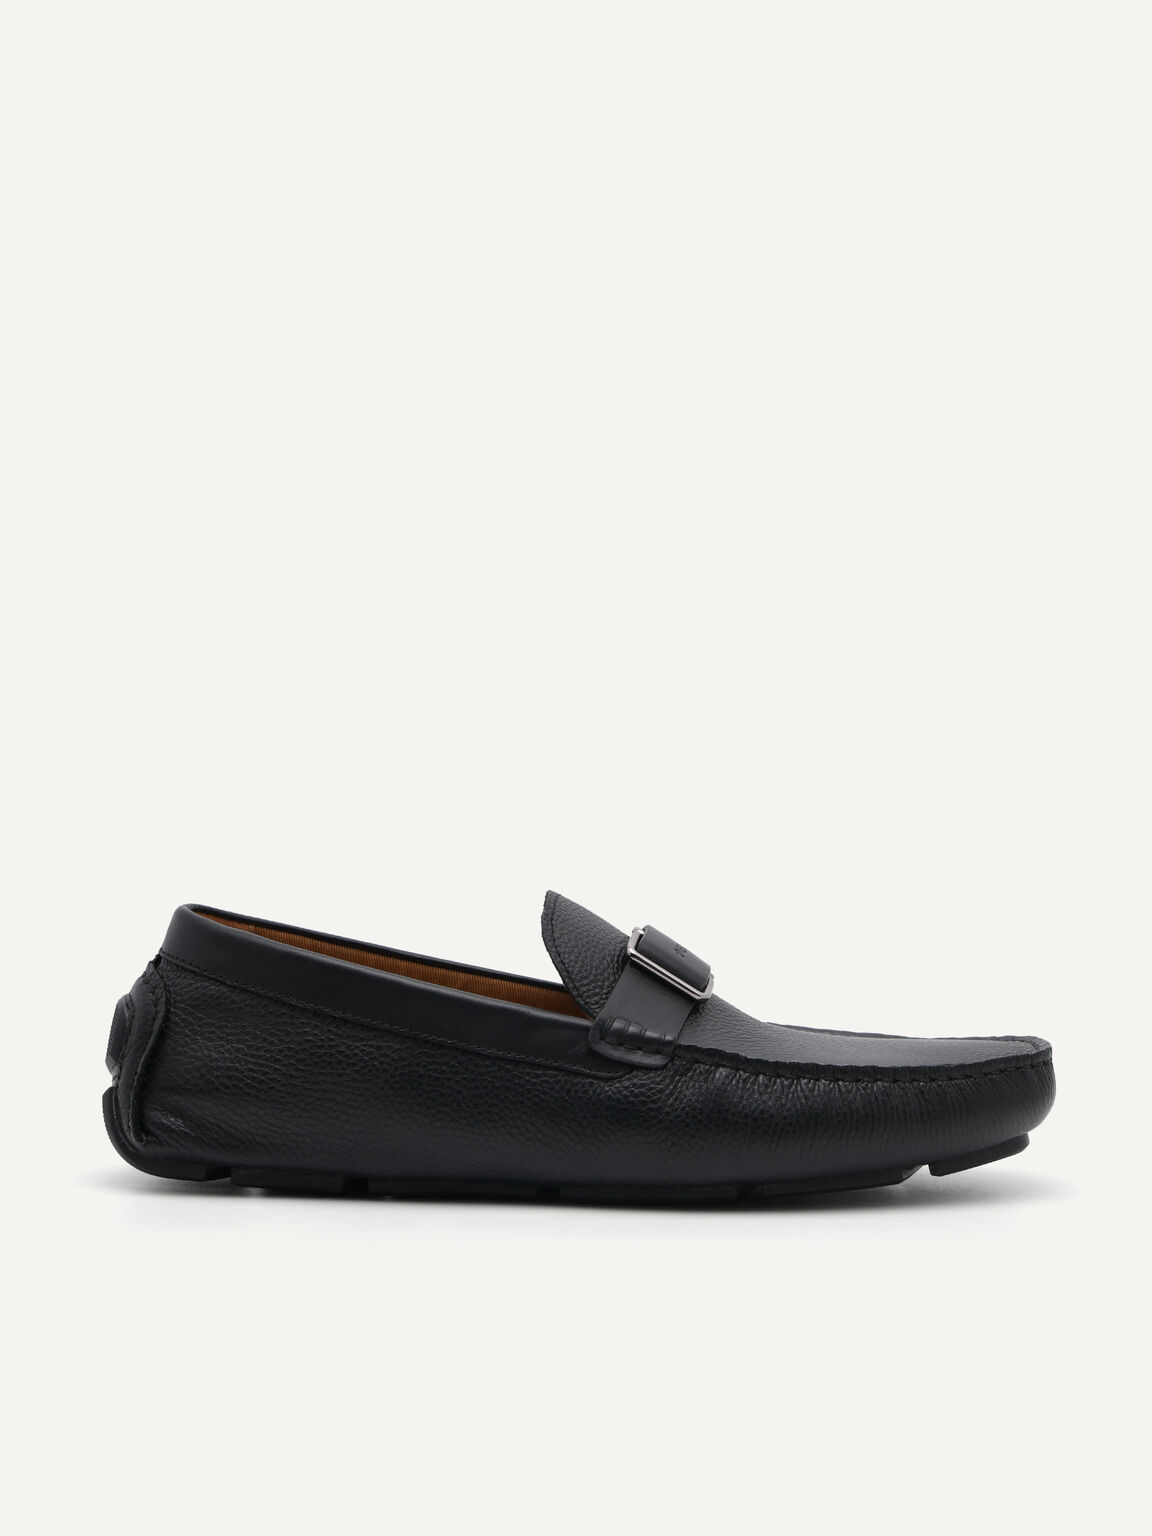 Embossed Leather Moccasins, Black